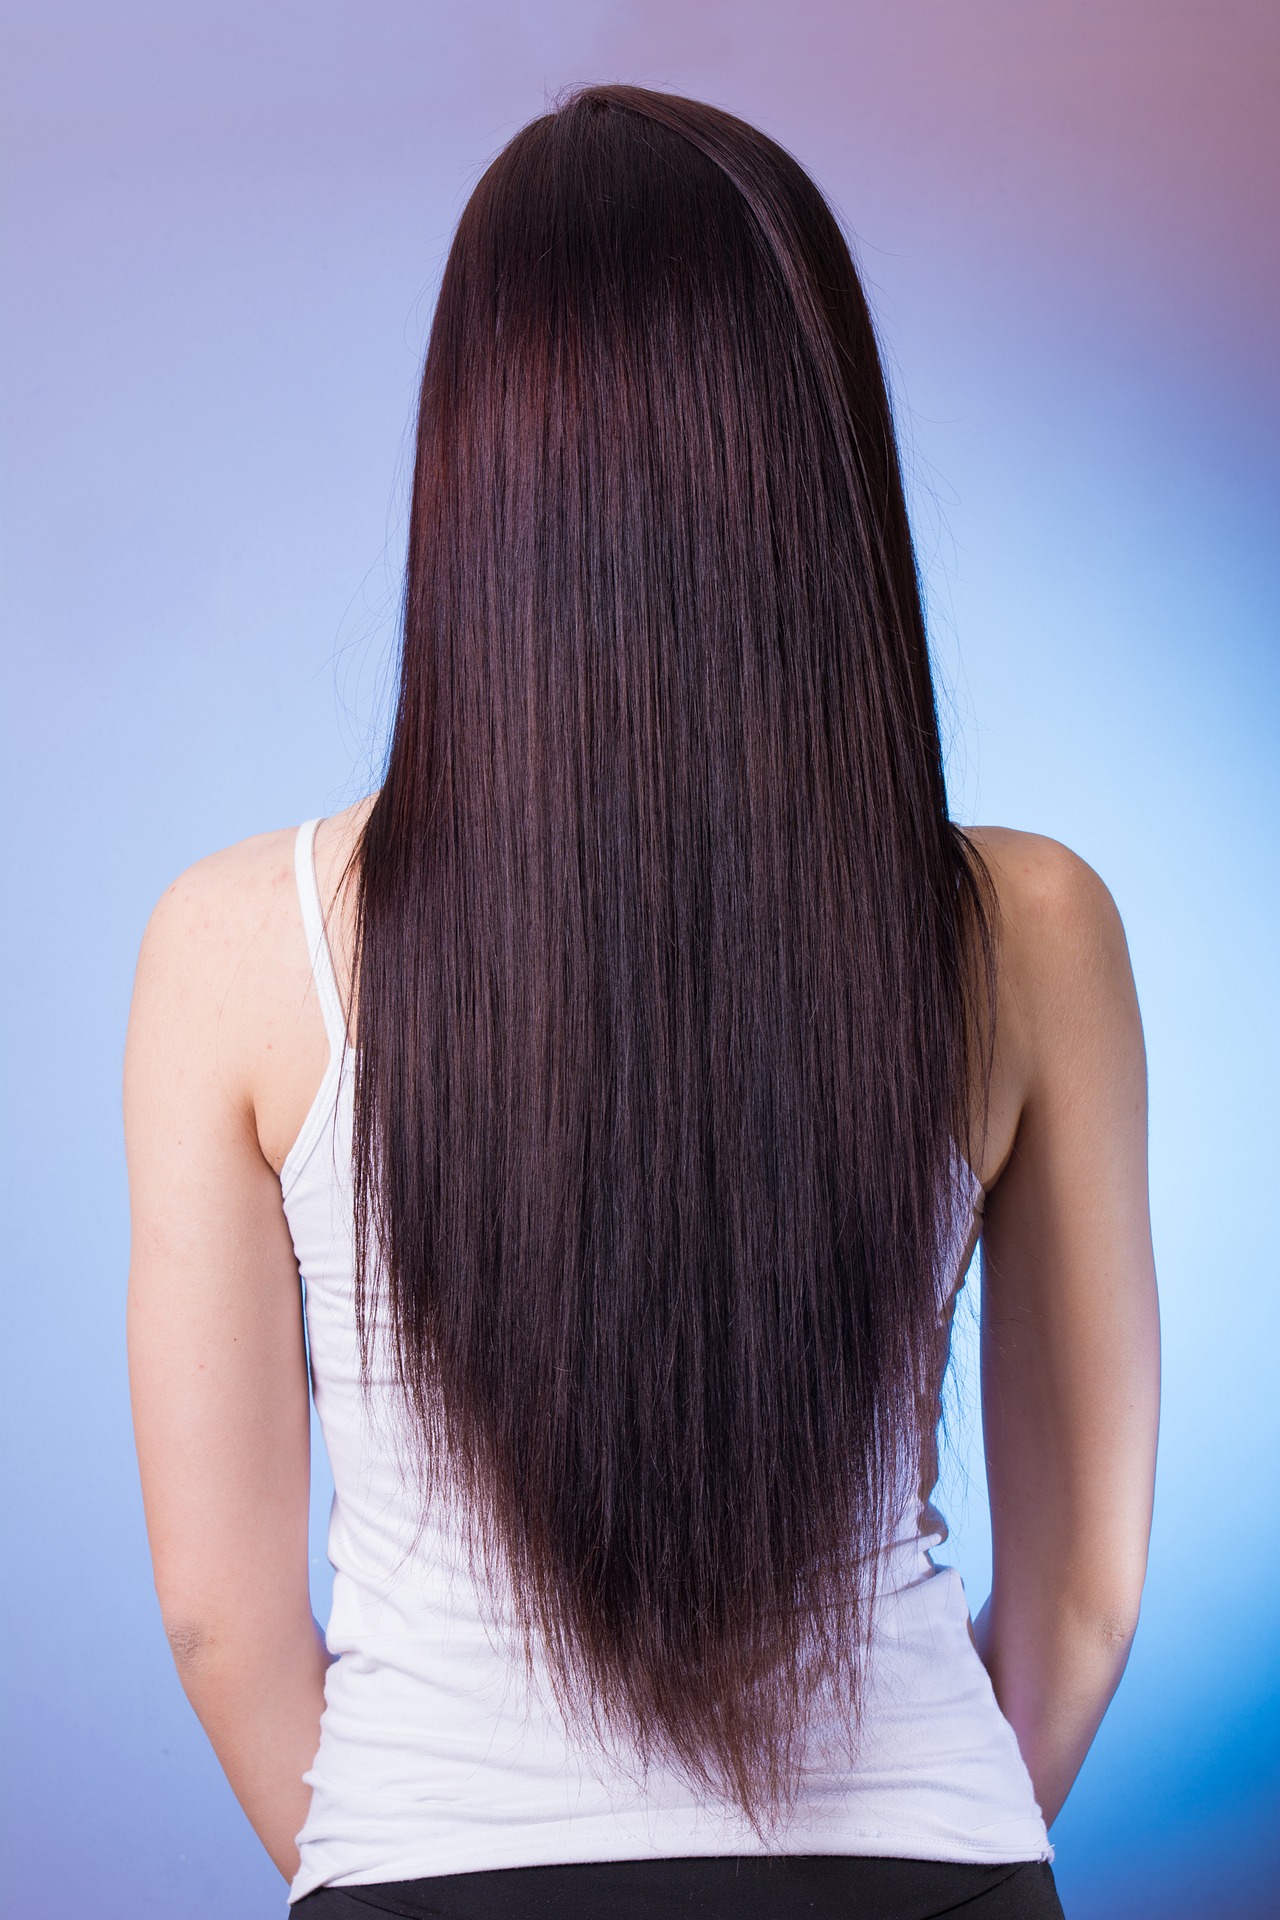 Cismis chemically treated hair care - Rebonding or Smoothing: 6 Facts to know before You Get Chemically Treated Straight Hair